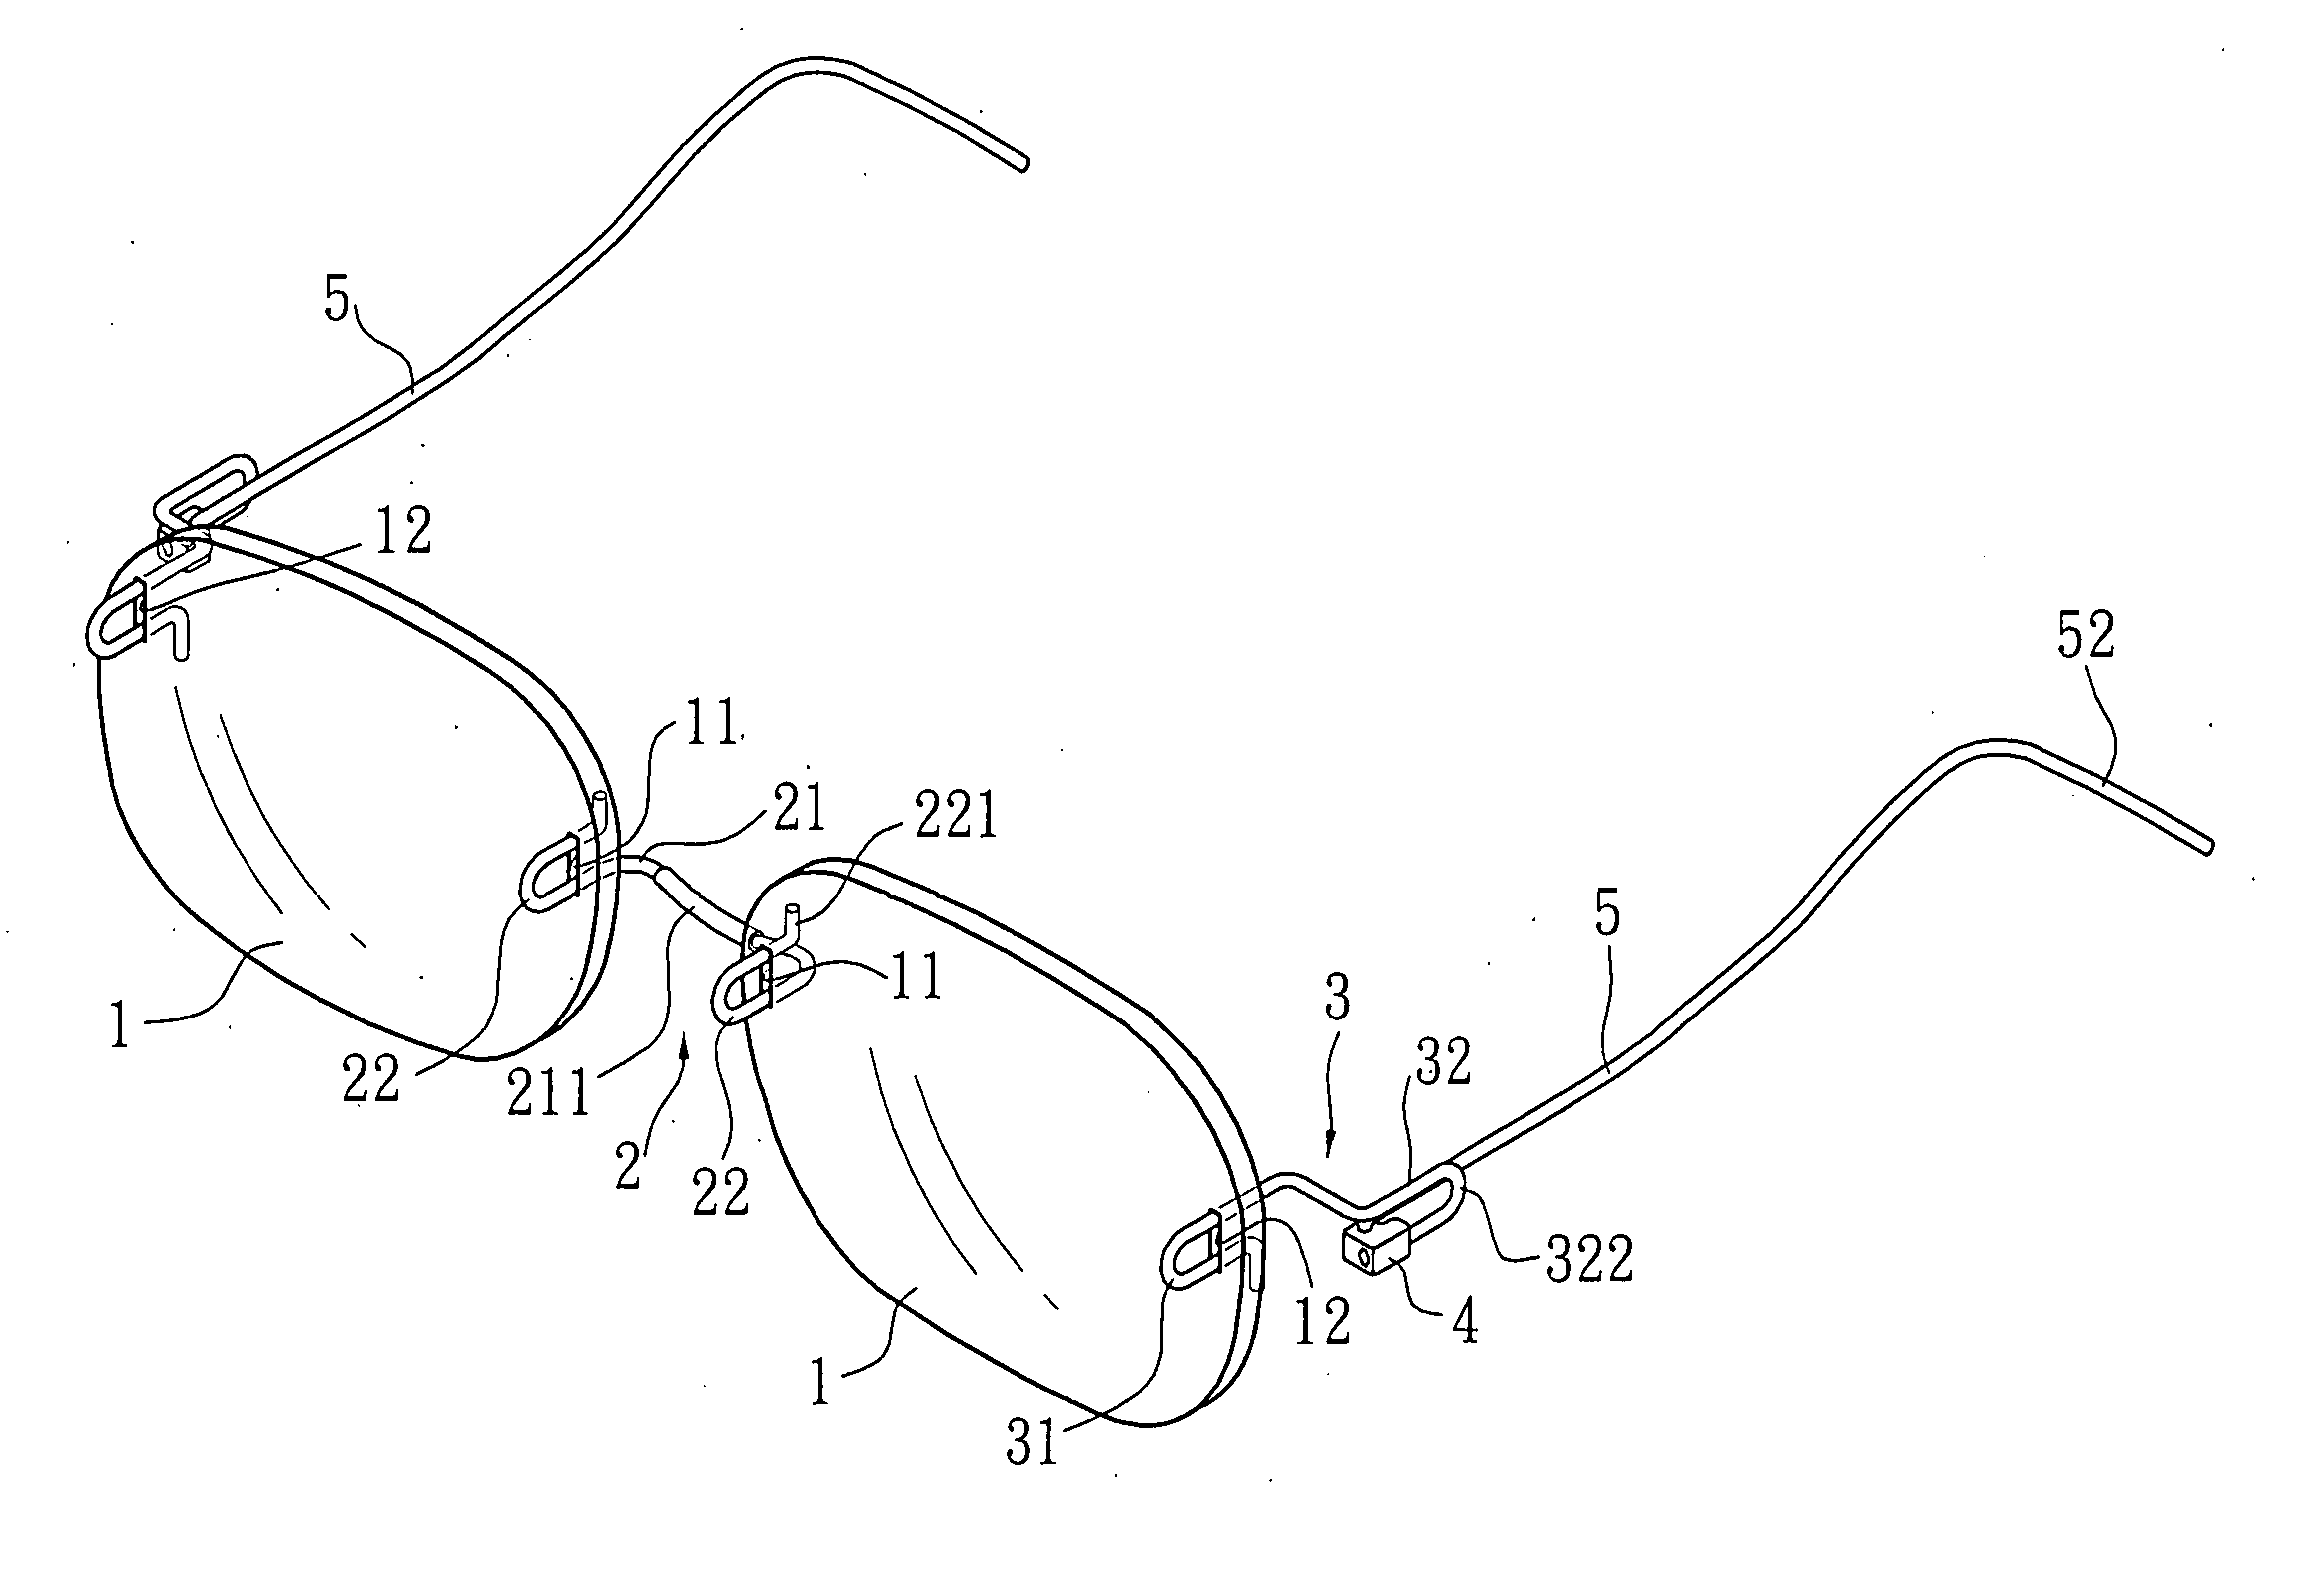 Assembling structure of a pair of glasses